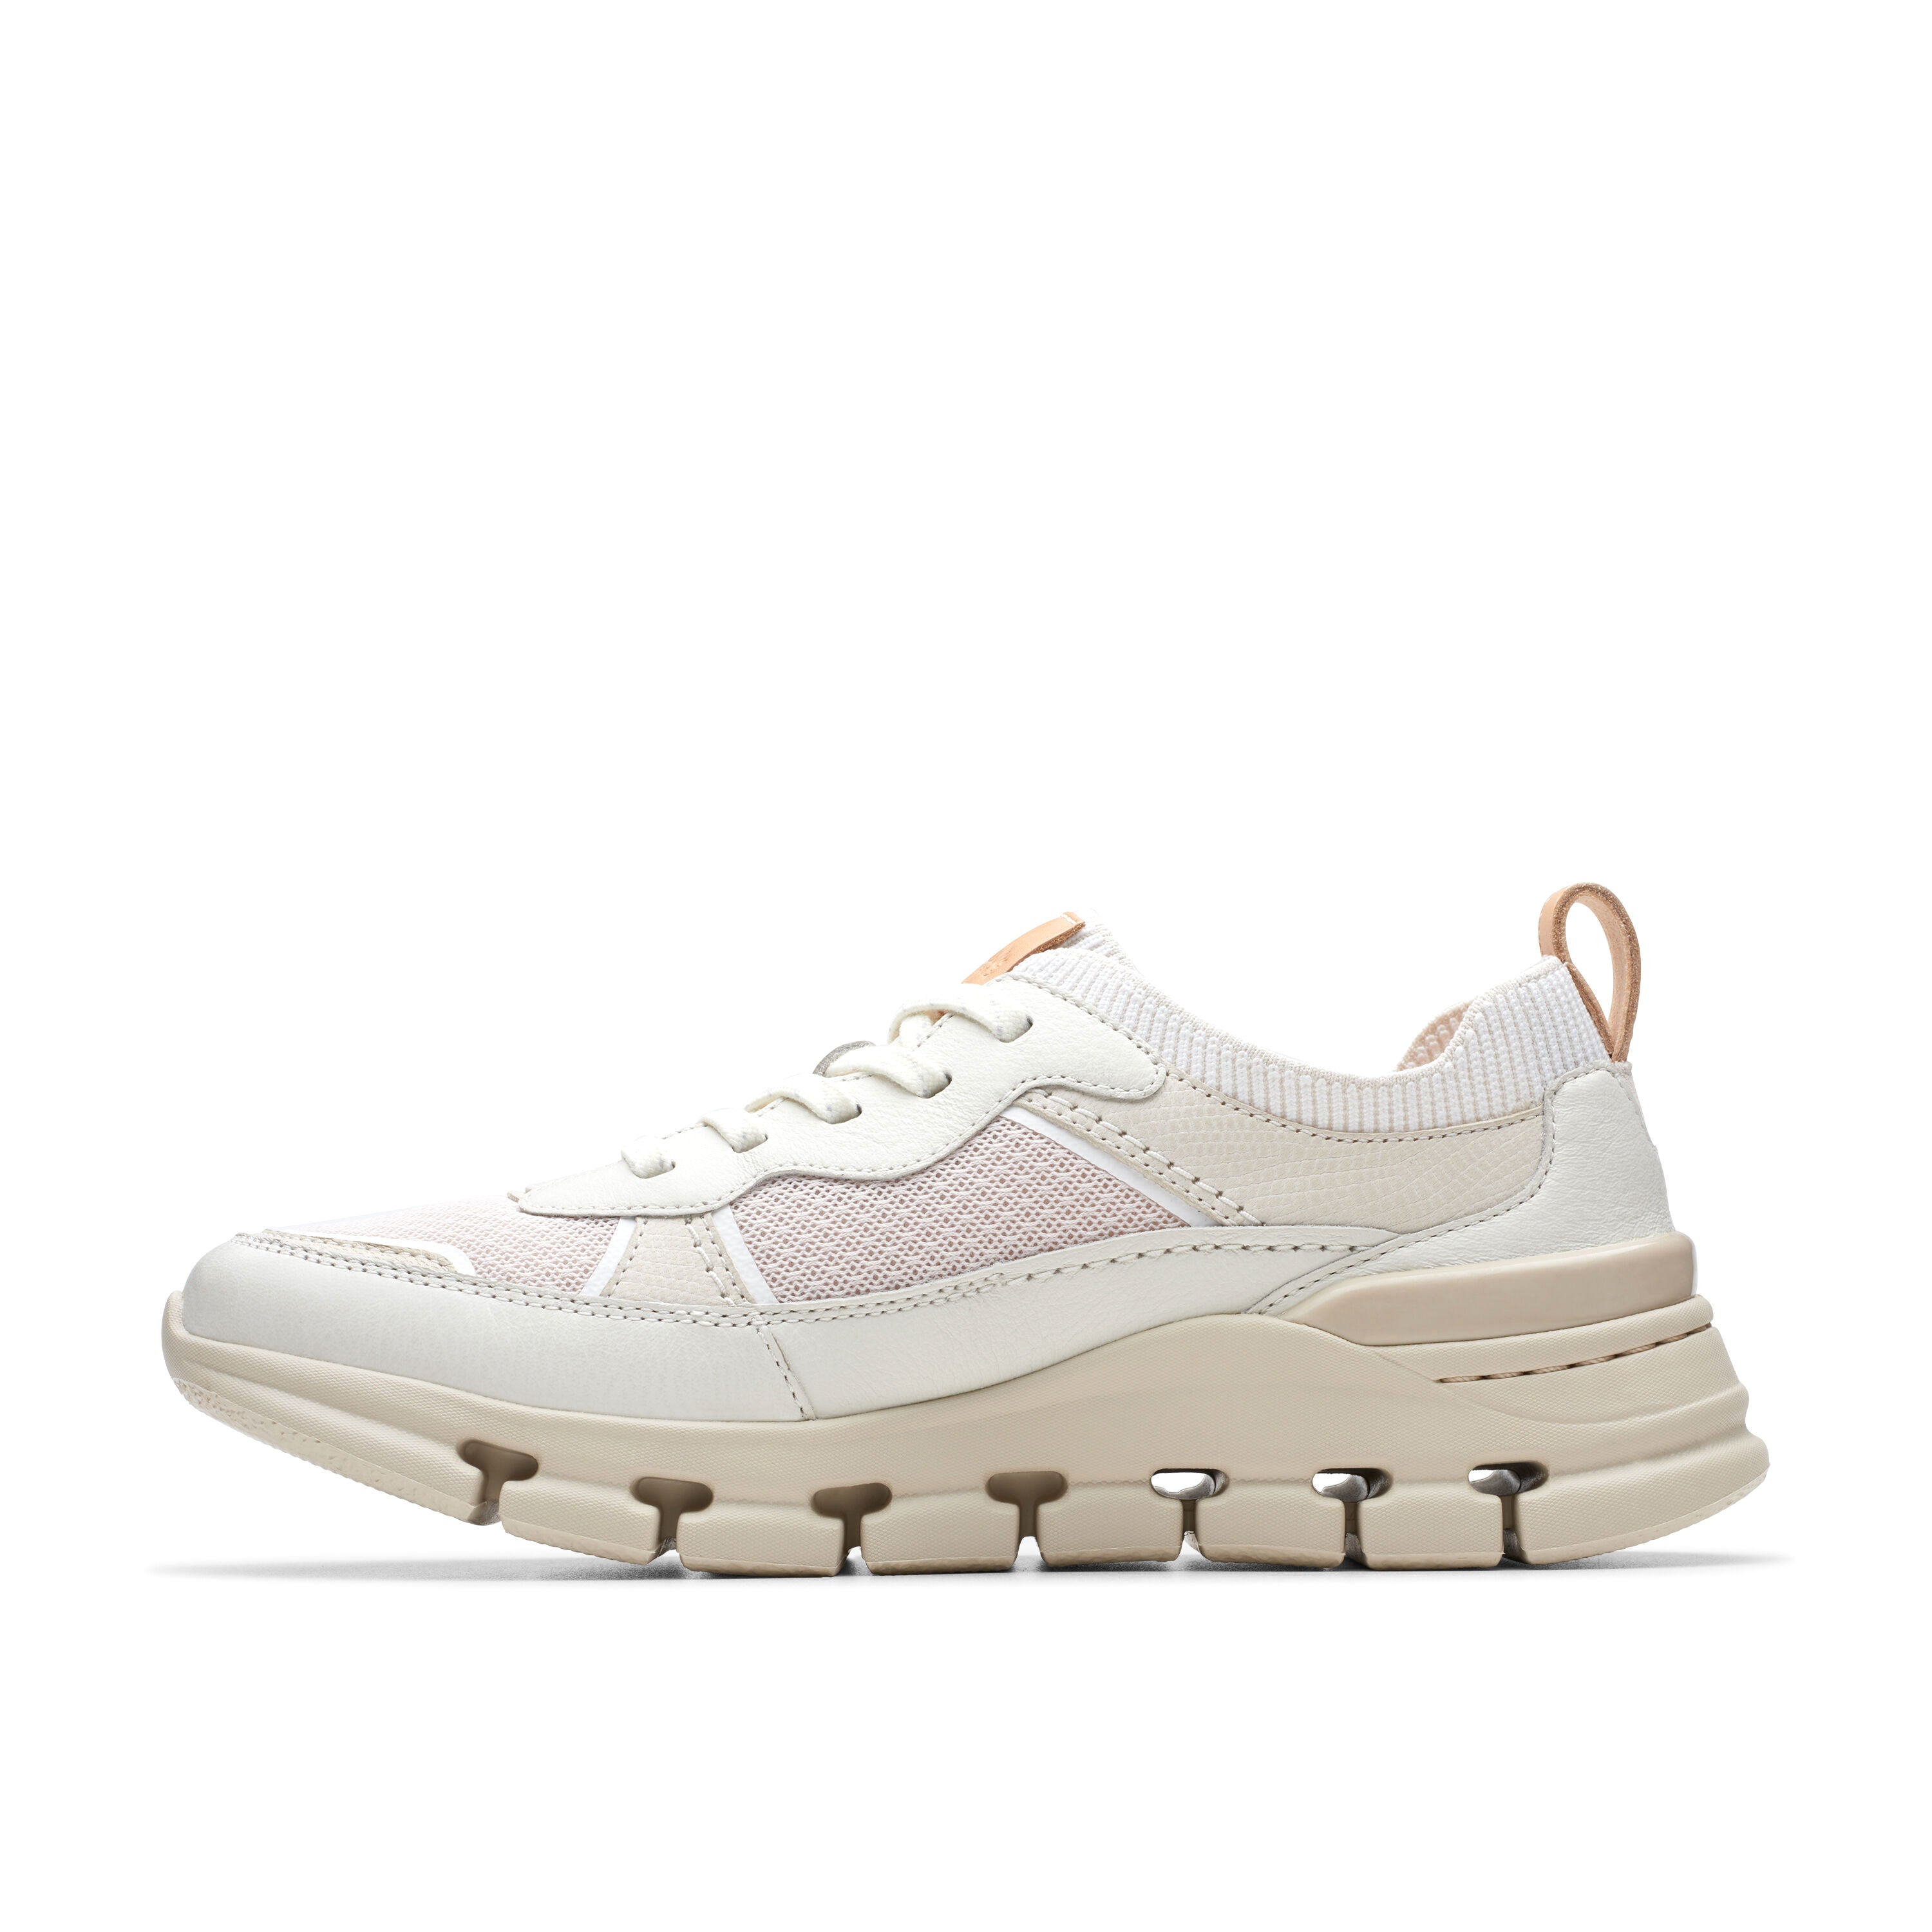 'Nature X Cove' women's walking sneakers - Off white